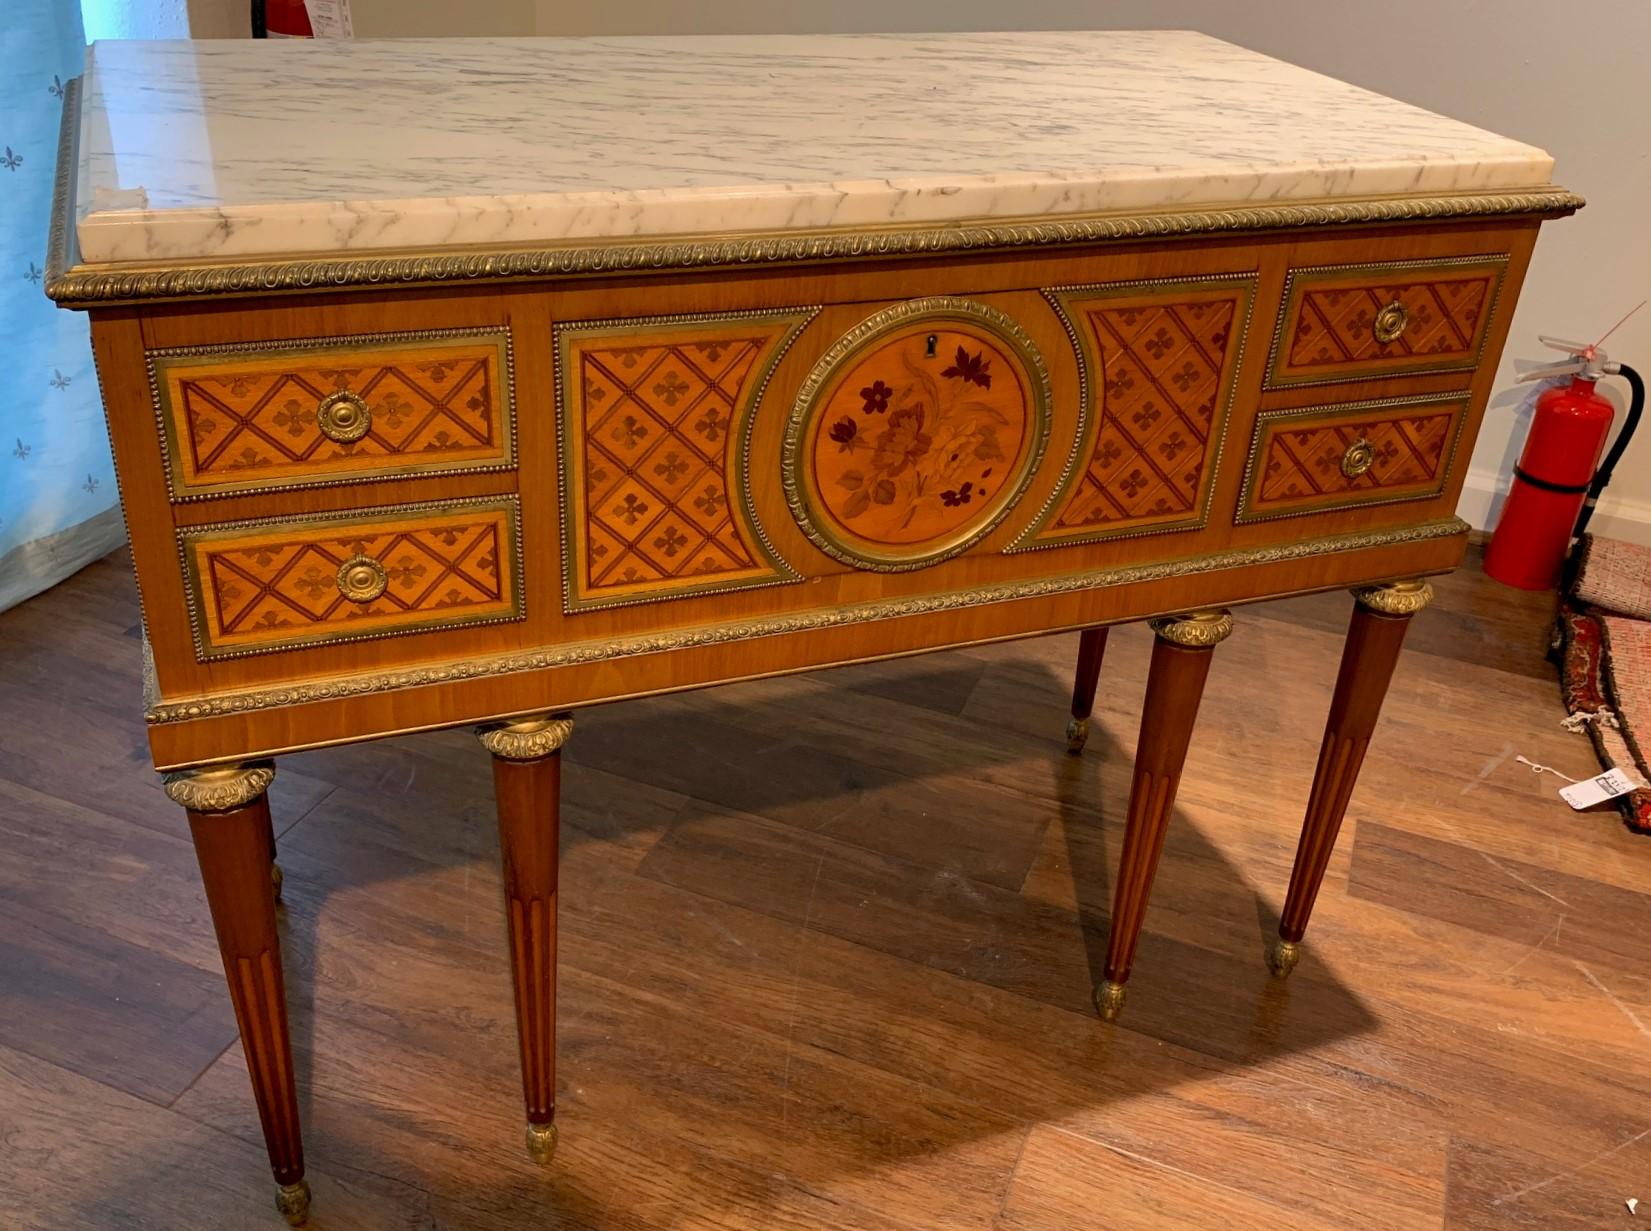 Outstanding antique French parquetry inlaid commode with a very thick and fine quality marble top. Exhibiting superb gilt bronze trim and a central panel inlaid with a floral bouquet utilizing a variety of woods. The entire on Classic Louis XVI